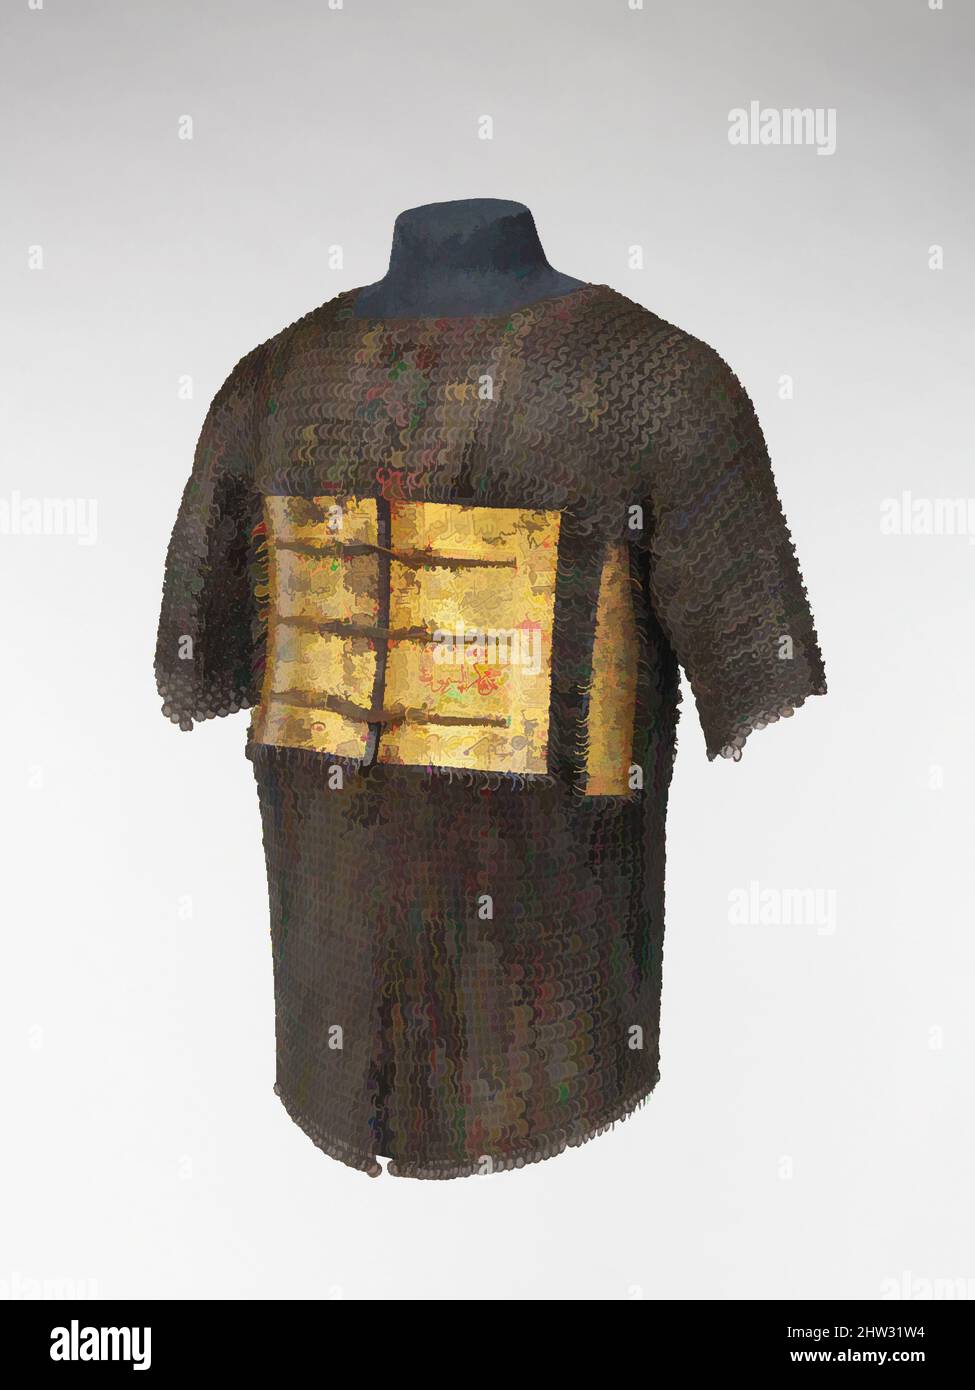 Art inspired by Shirt of Mail and Plate, dated A.H. 1042/A.D. 1632–33, Indian, Steel, iron, gold, leather, as mounted, H. 32 in. (81.3 cm)l; L. 31 in. (78.8 cm); W. 40 in. (101.5 cm); Wt. 23 lb. 10 oz. (10.7 kg), Mail, This shirt ranks as one of the most beautiful surviving Mughal, Classic works modernized by Artotop with a splash of modernity. Shapes, color and value, eye-catching visual impact on art. Emotions through freedom of artworks in a contemporary way. A timeless message pursuing a wildly creative new direction. Artists turning to the digital medium and creating the Artotop NFT Stock Photo